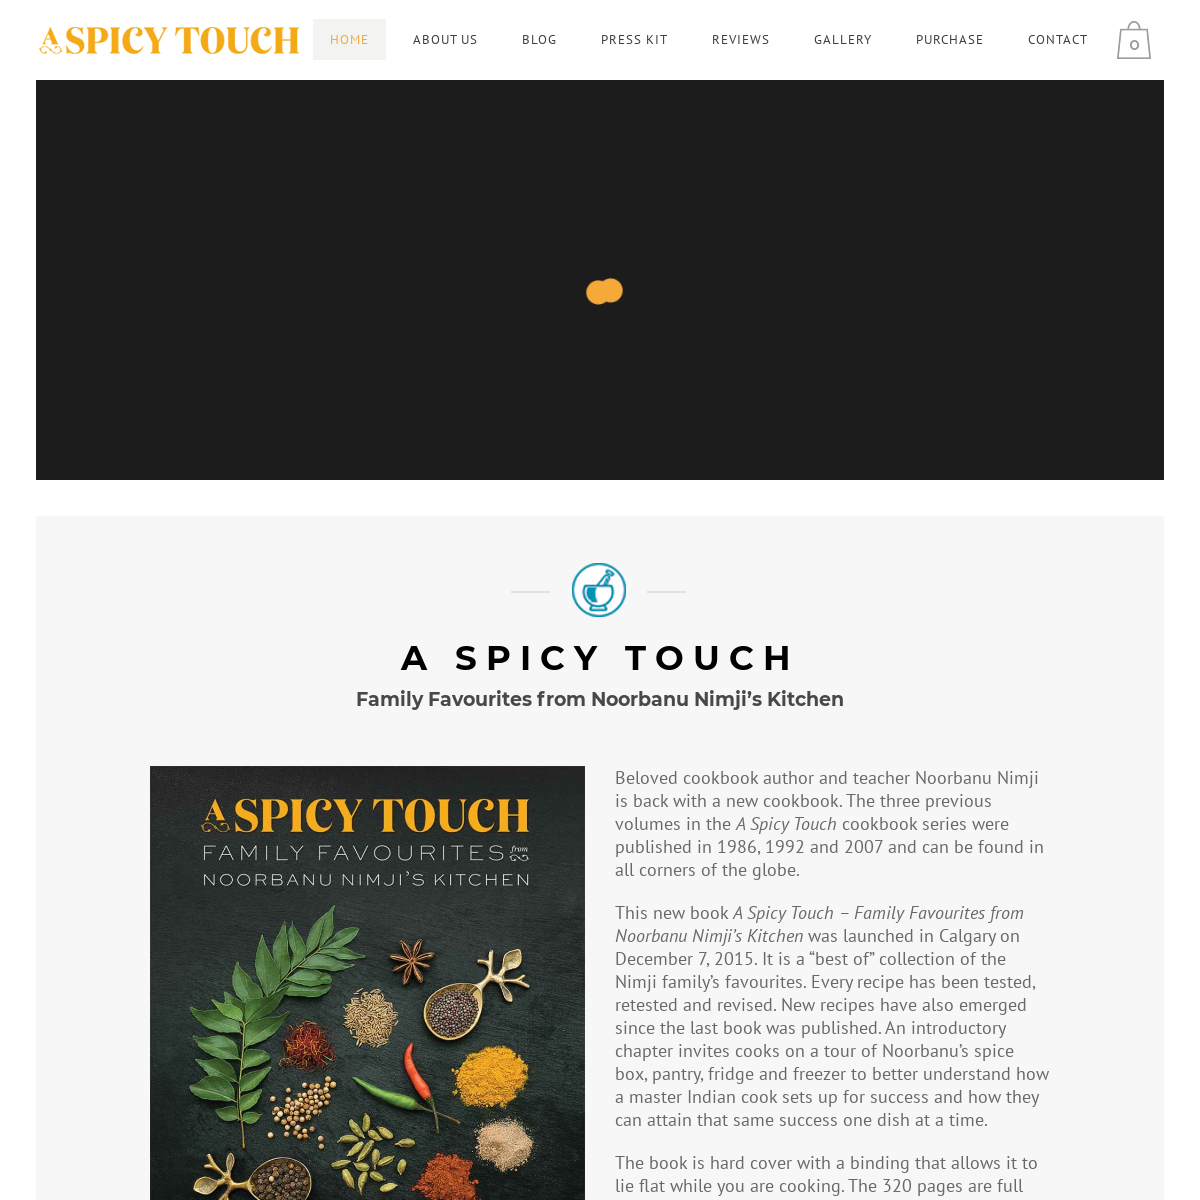 A complete backup of aspicytouch.ca